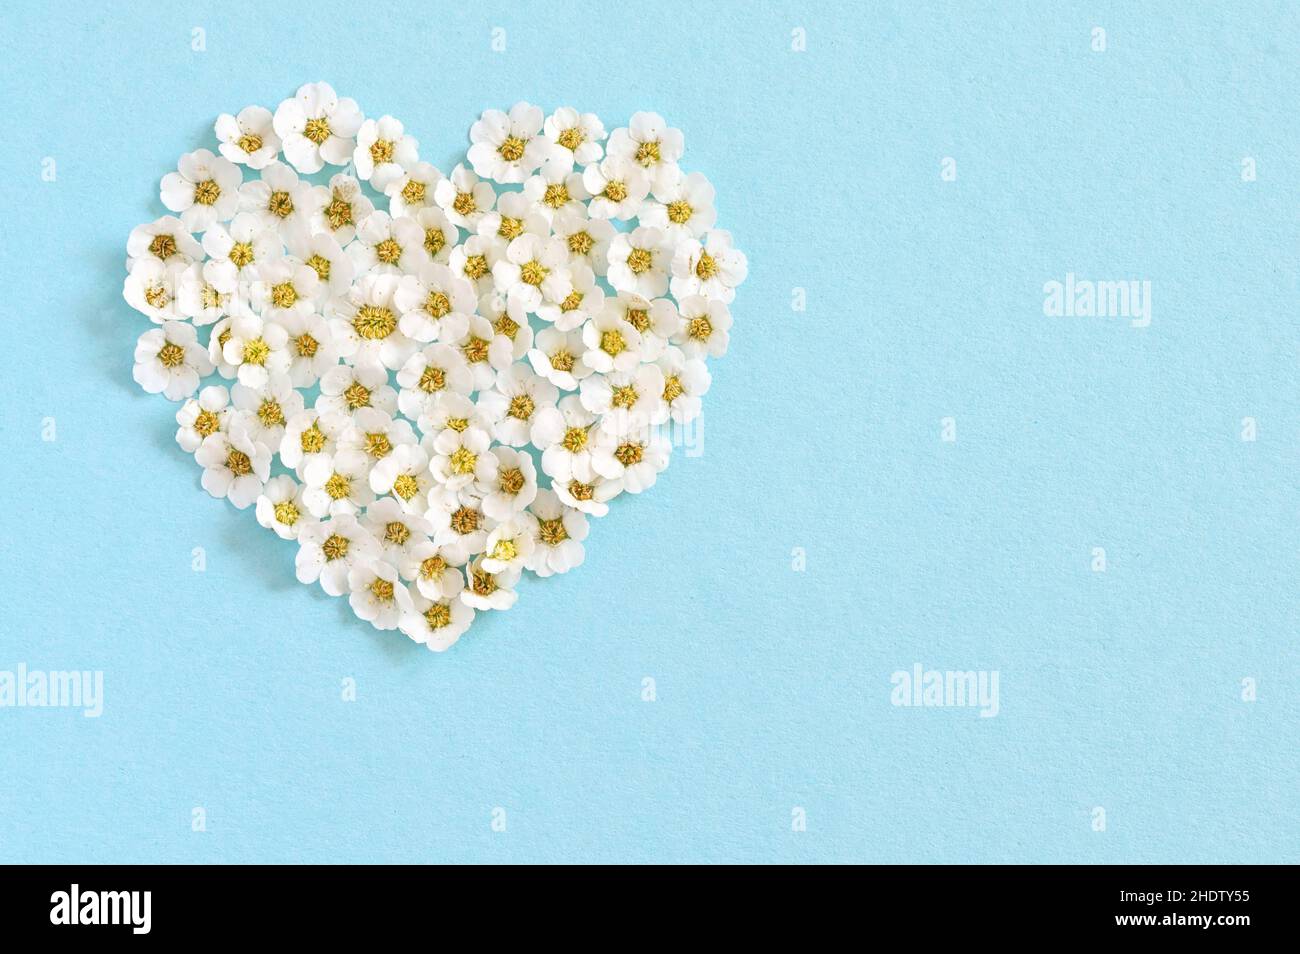 heart, mothers day, valentine, hearts, mothers days, valentine's day, valentines, valentines day Stock Photo